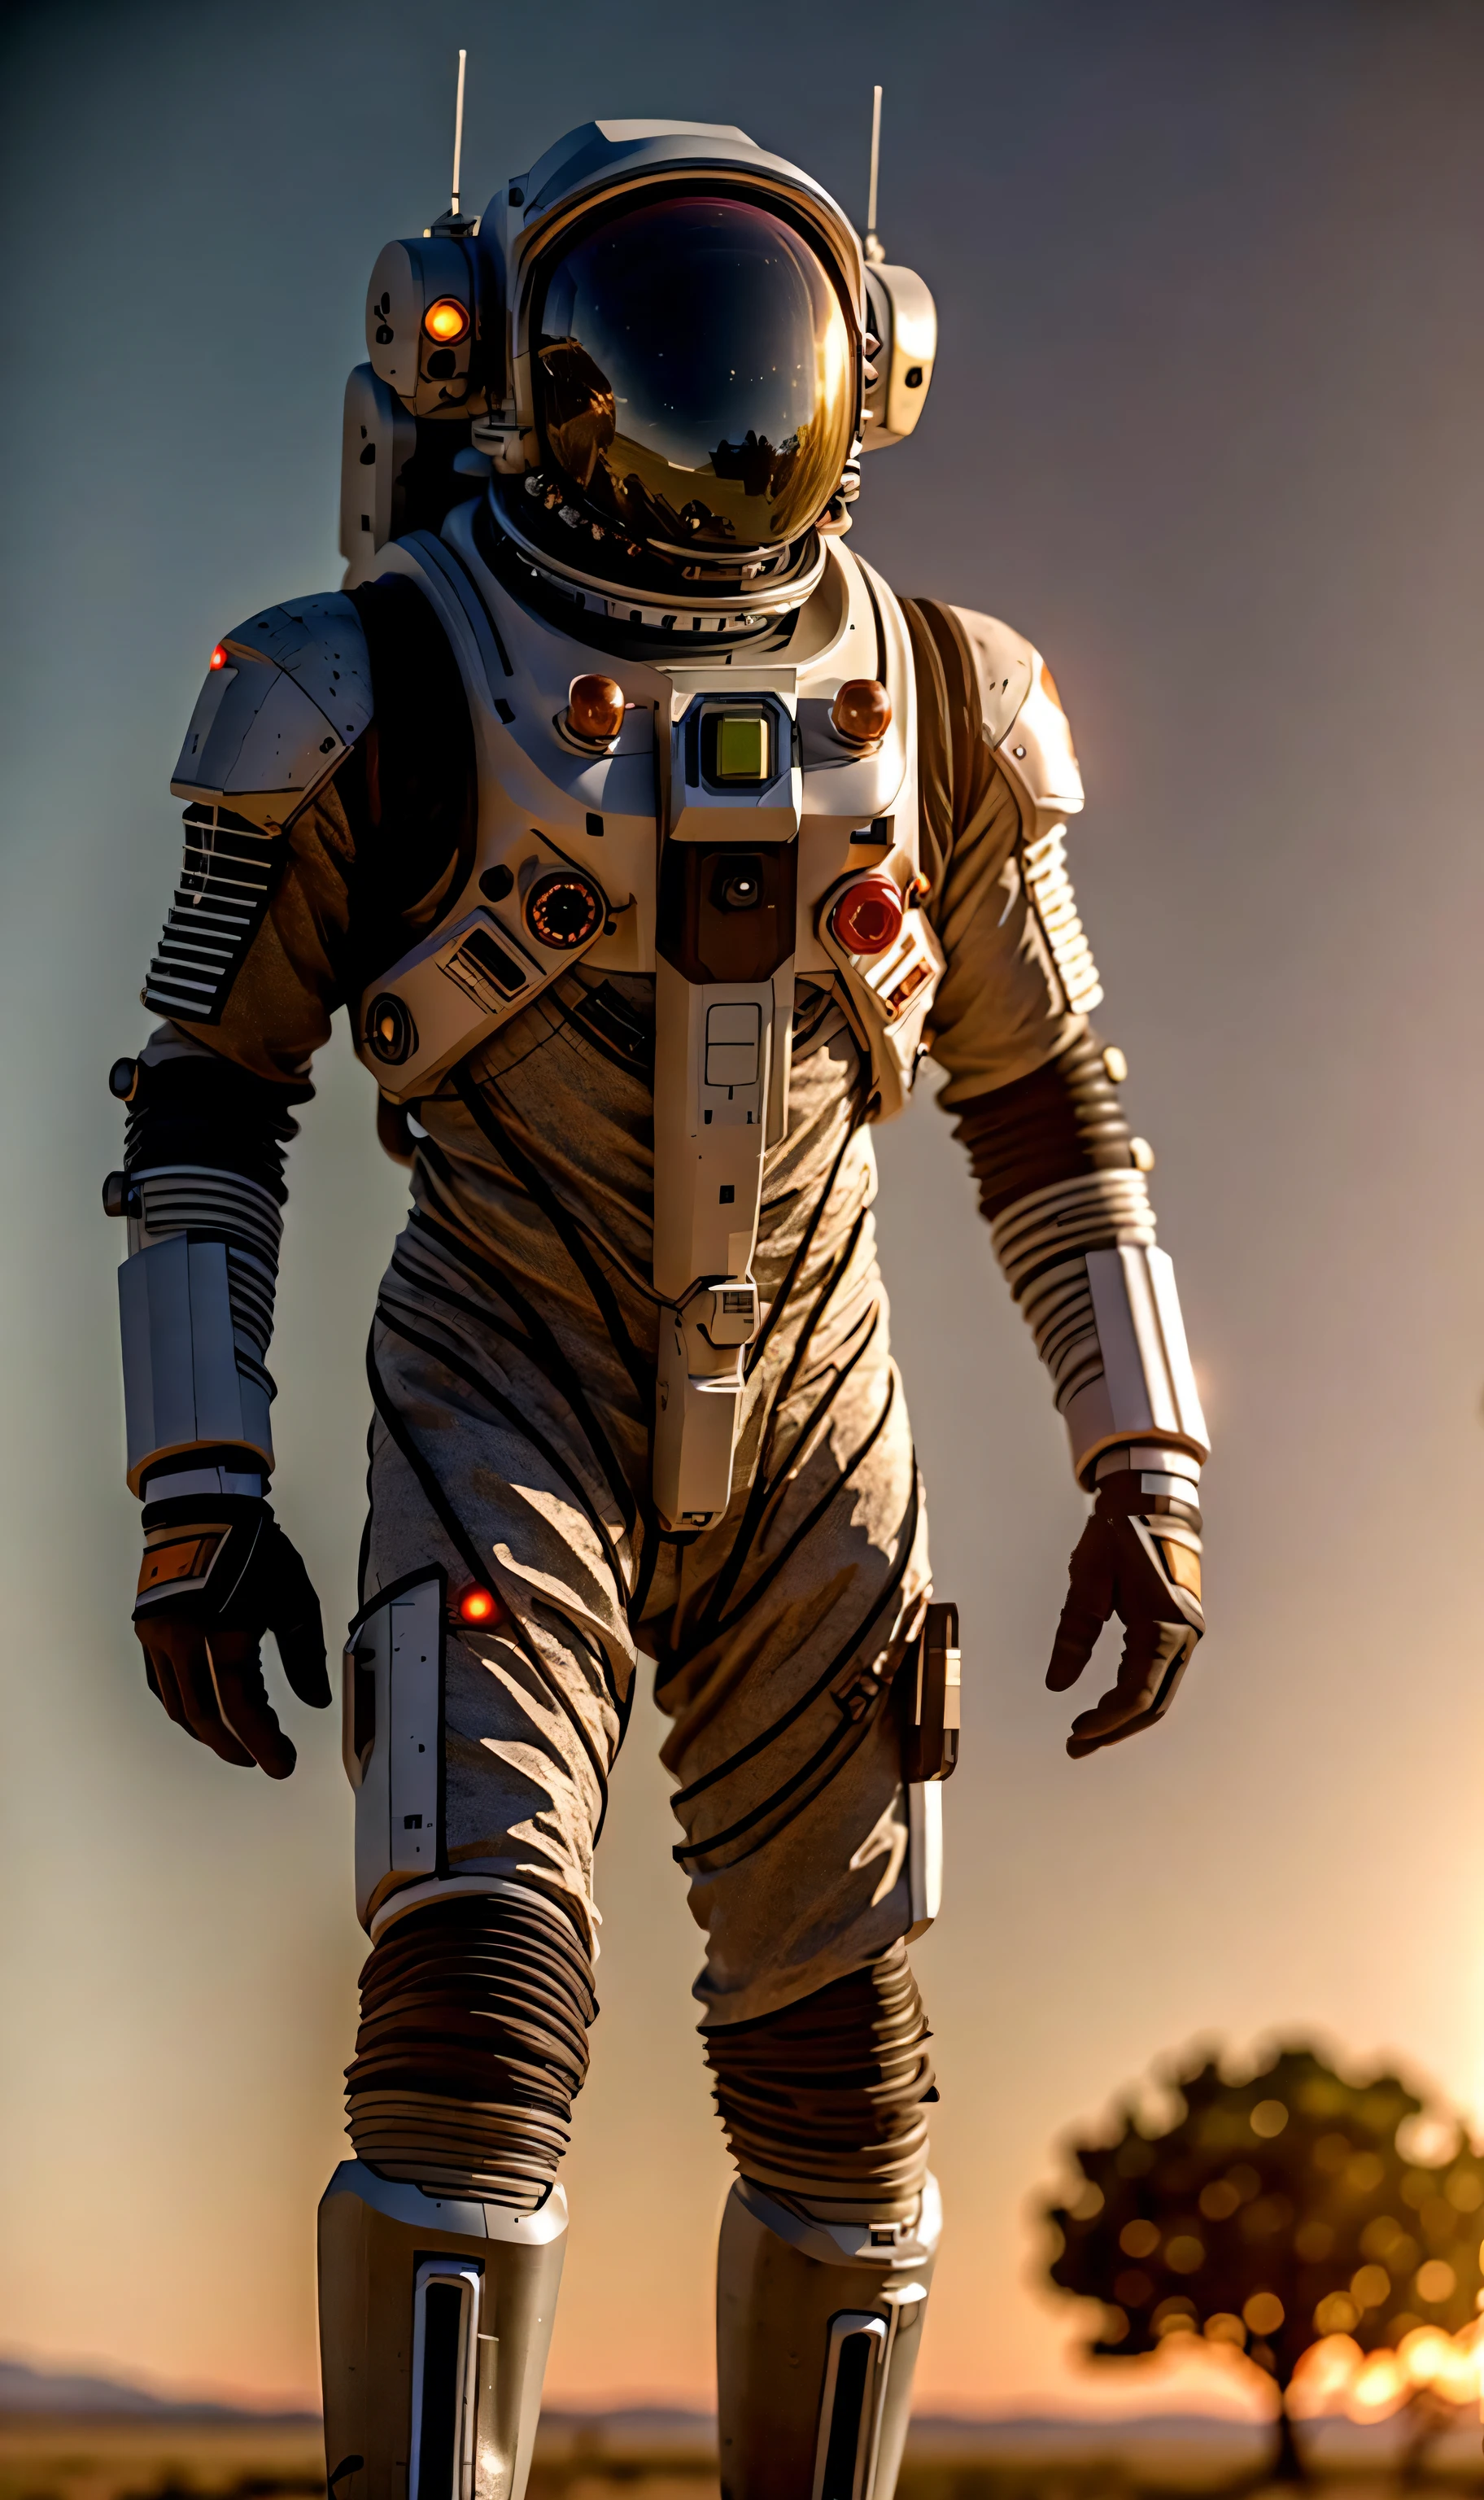 kit bashing, alien landscape, swampland, solitary (male:1.2) astronaut, radio dish antenna, Hot Pink, utility belt, Silver Gray Pewter, sci-fi, masterpiece, 16k, UHD, HDR, the best quality, body-tight suit, intricate, the most fantastic details, cinematic composition, dramatic lighting, full body, celestial bodies in the sky, dead trees, dry bushes, realistic reflections, sunset, a military compound, to scale, , sad, dynamic posture